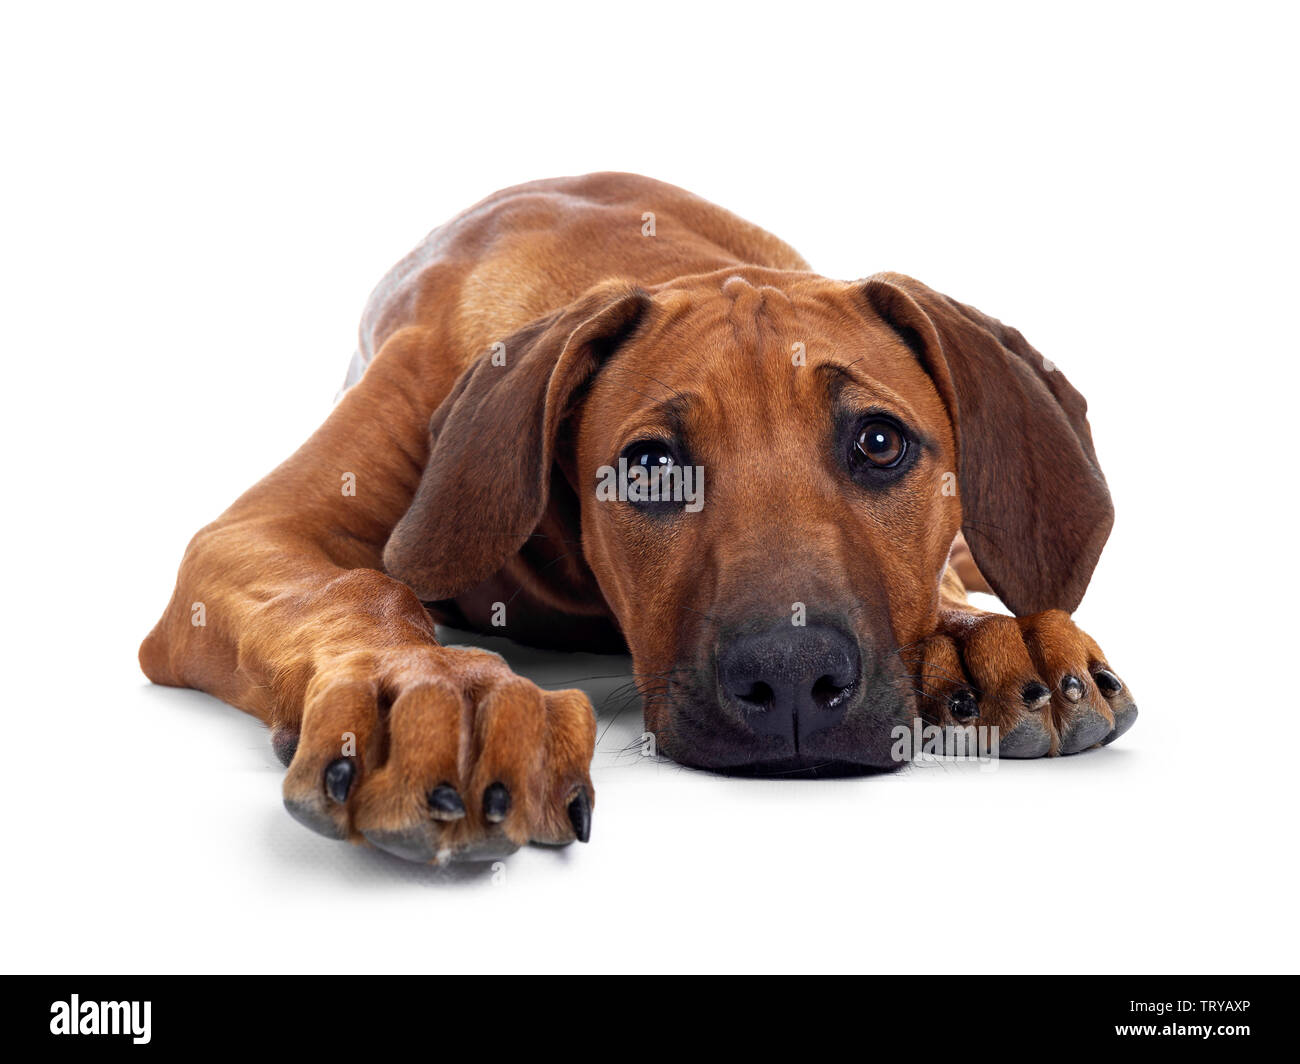 Cute wheaten Rhodesian Ridgeback puppy dog with dark muzzle, laying down facing front. Looking at camera with sweet brown eyes. Isolated on white back Stock Photo